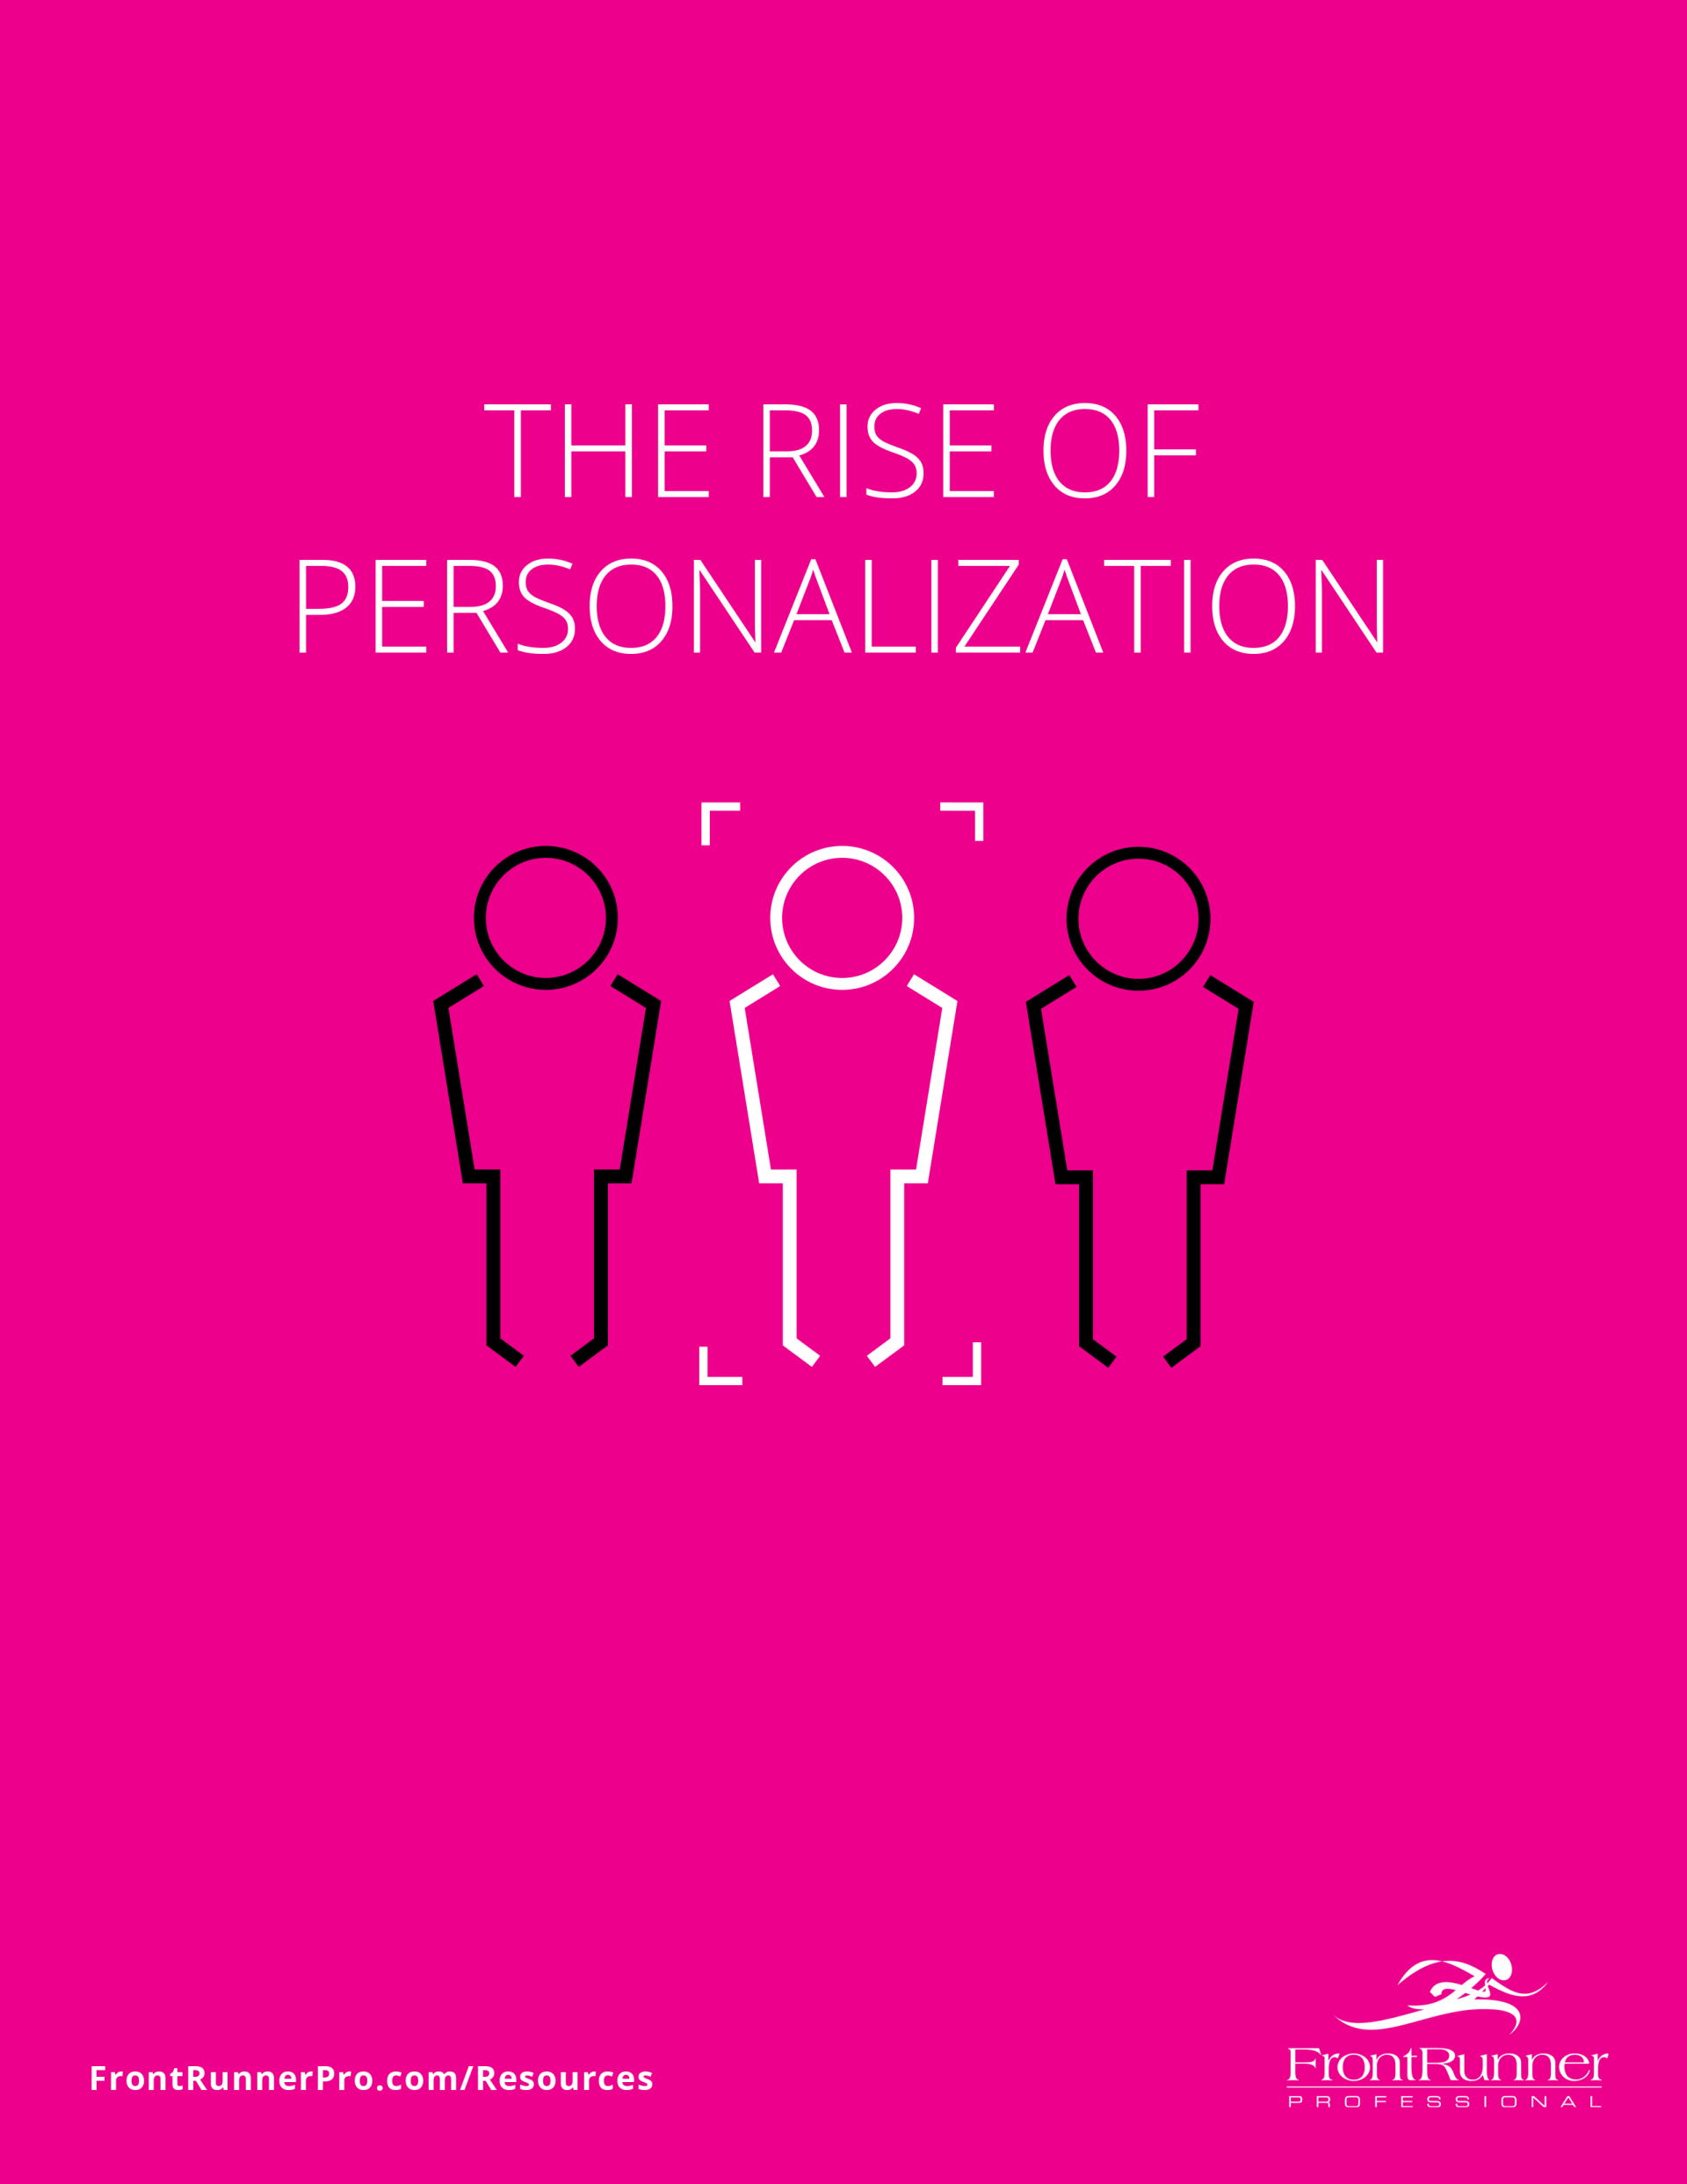 The Rise of Personalization